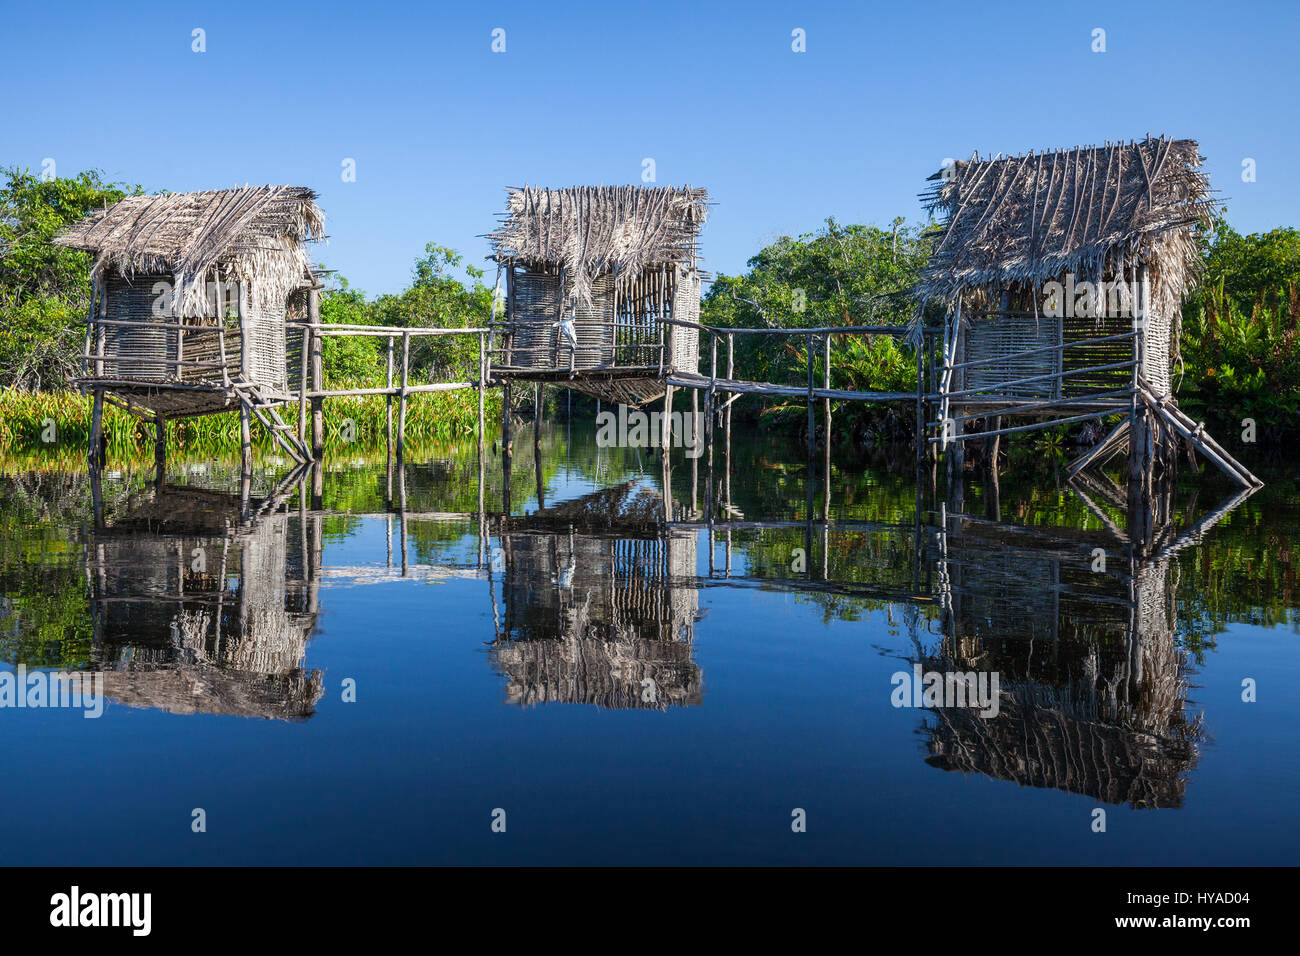 Three houses on stilts in the tranquil waters of La Tovara Reserve, San Blas, Mexico. Stock Photo